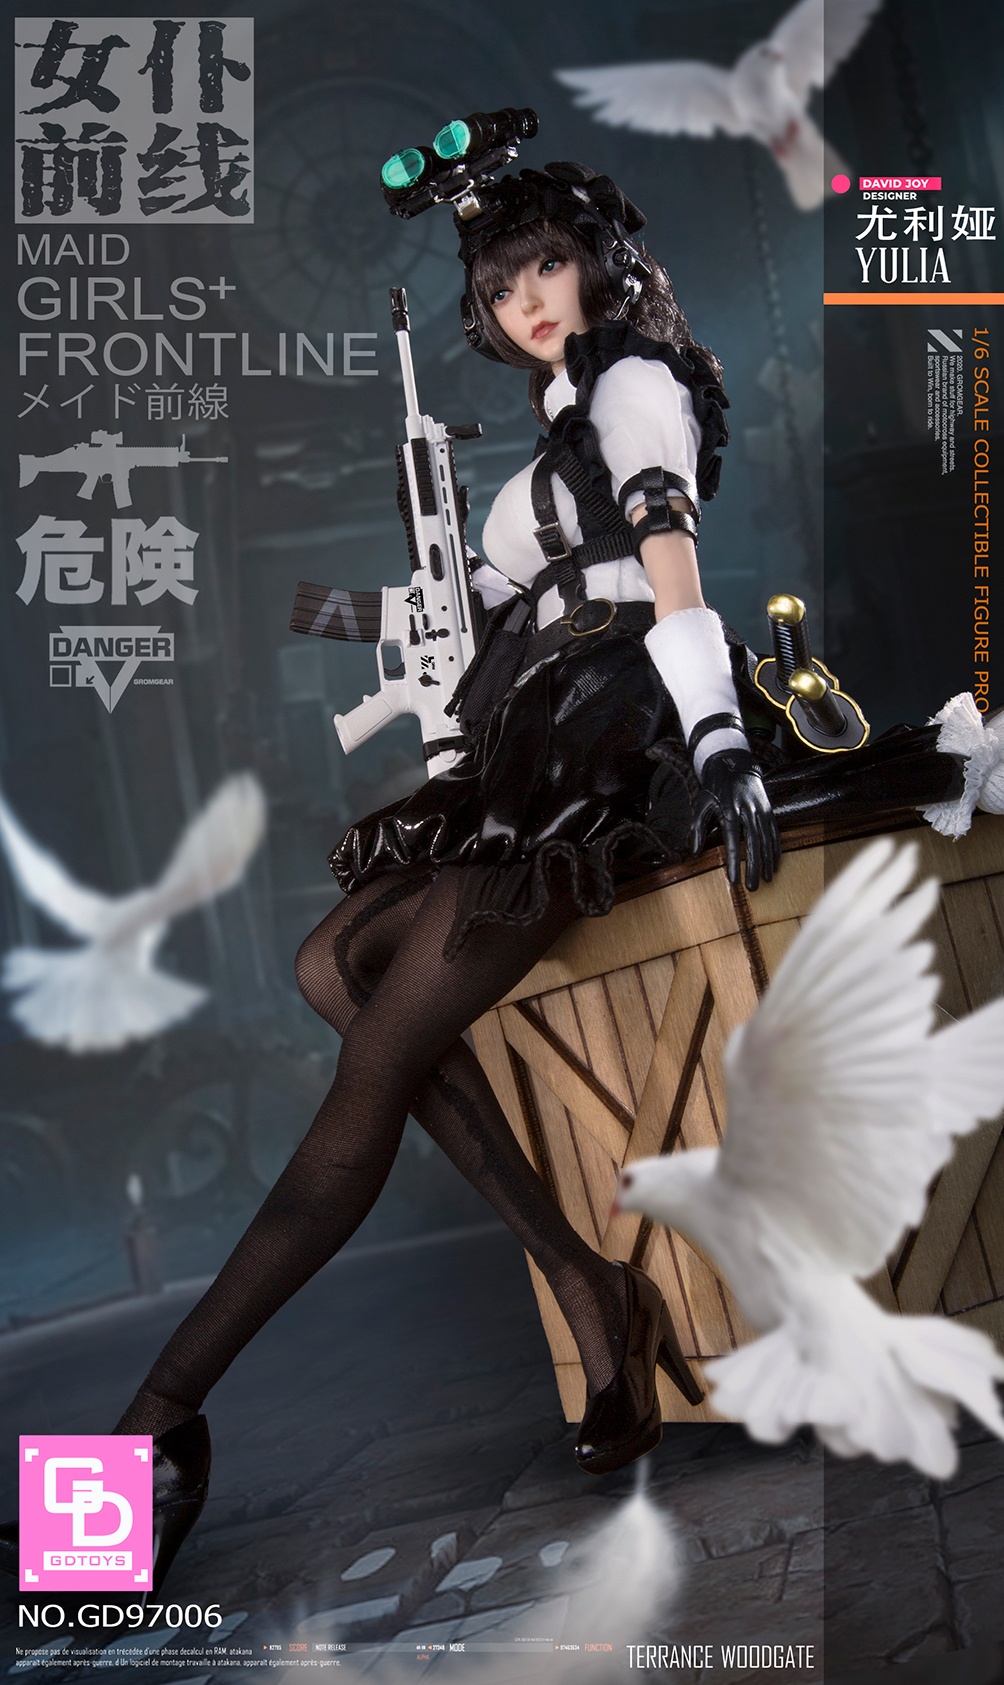 NEW PRODUCT: GDTOYS: GD97006 1/6 Scale Maid Girls+ Frontline - YULIA 22563310